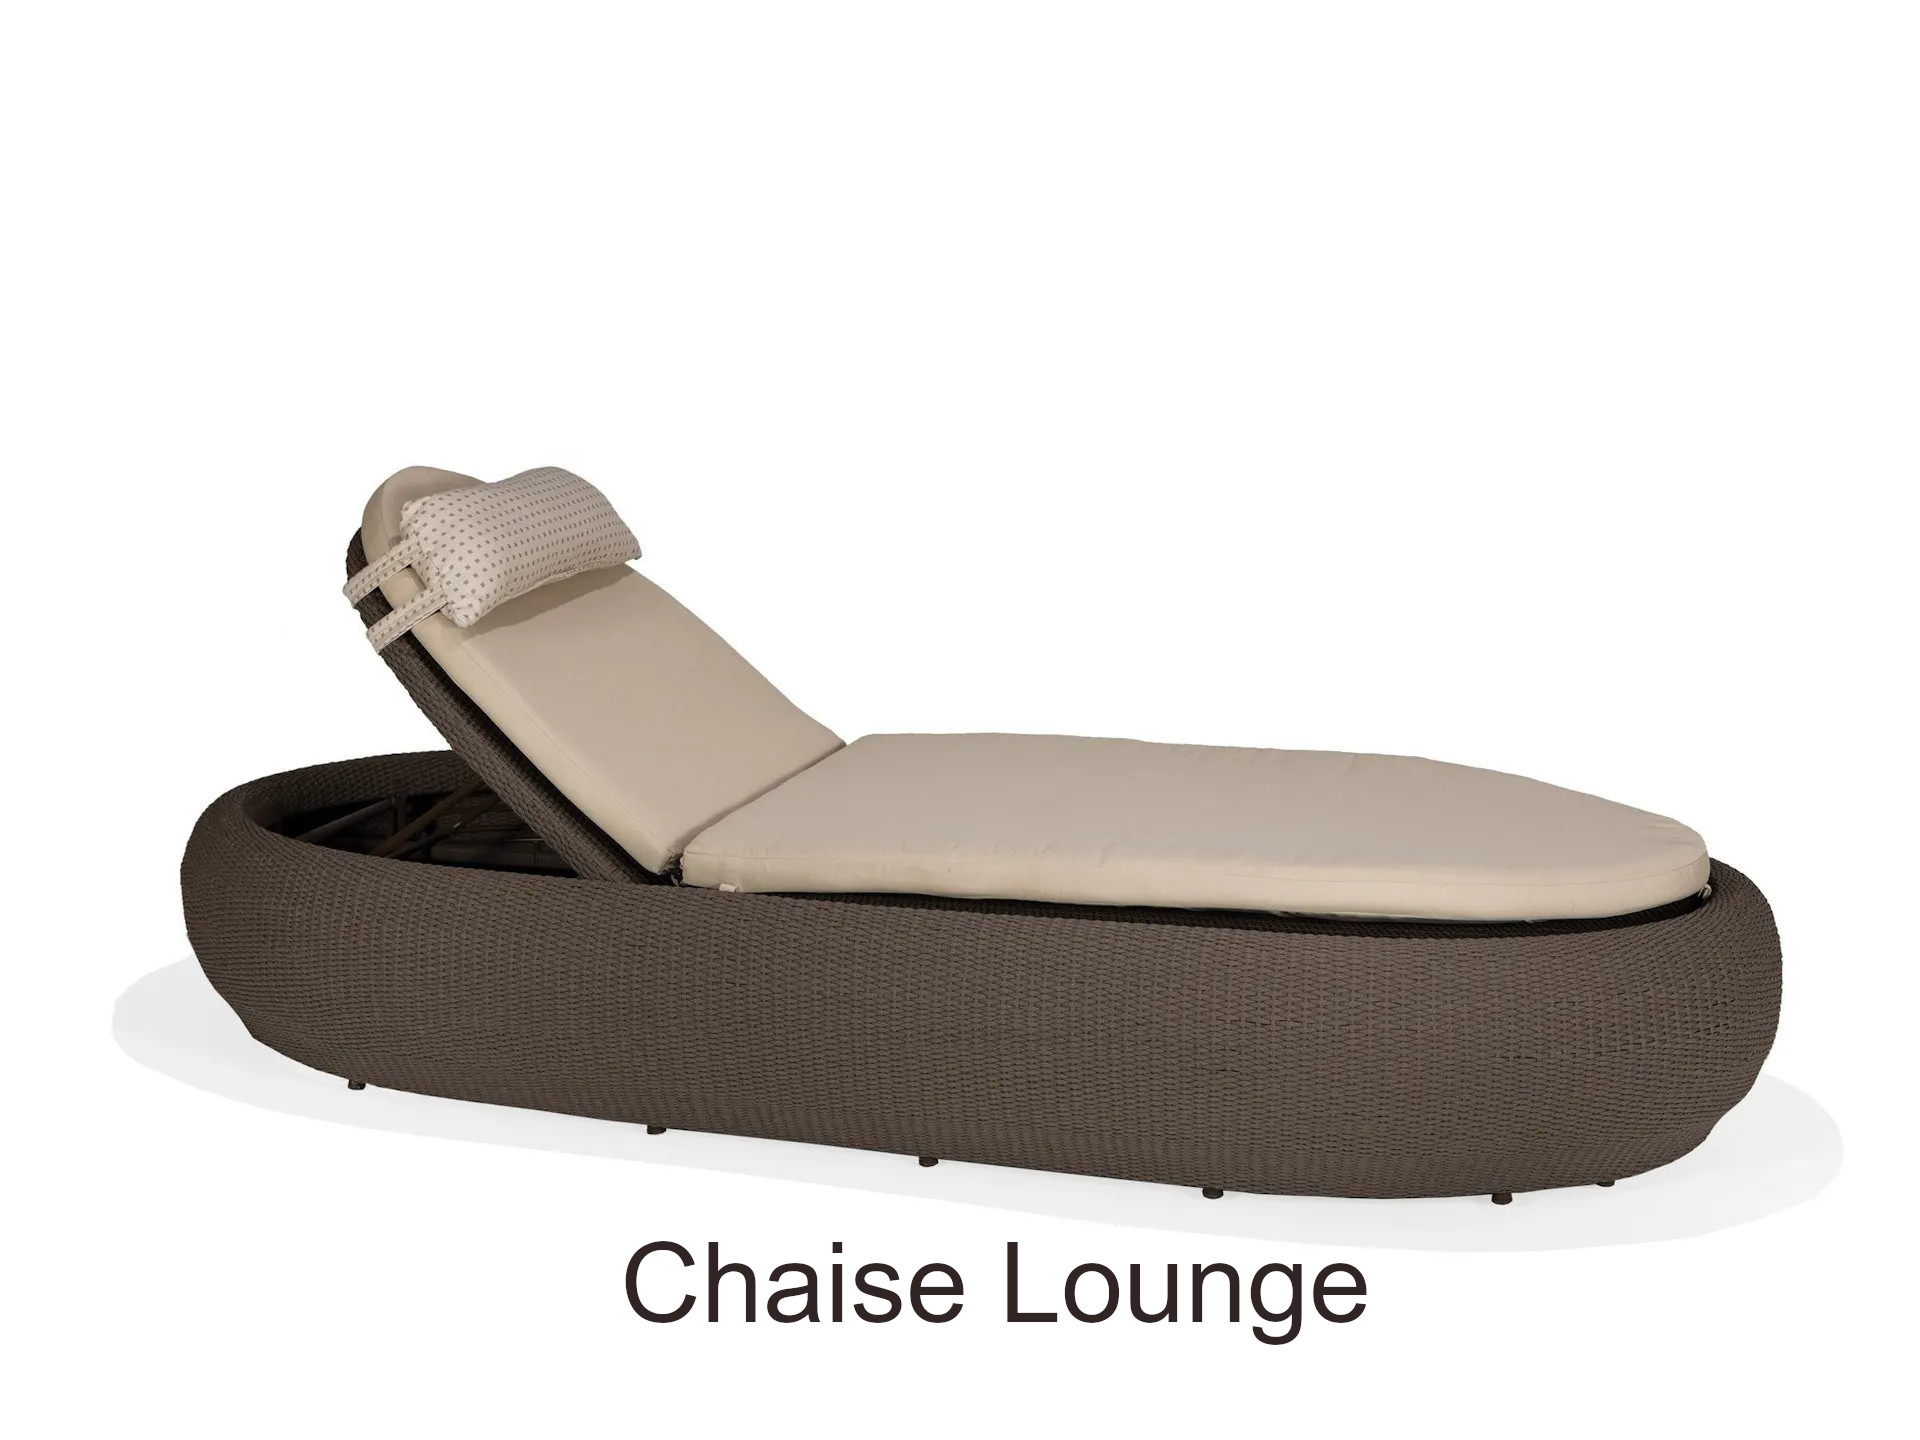 Em Collection Chaise Lounge